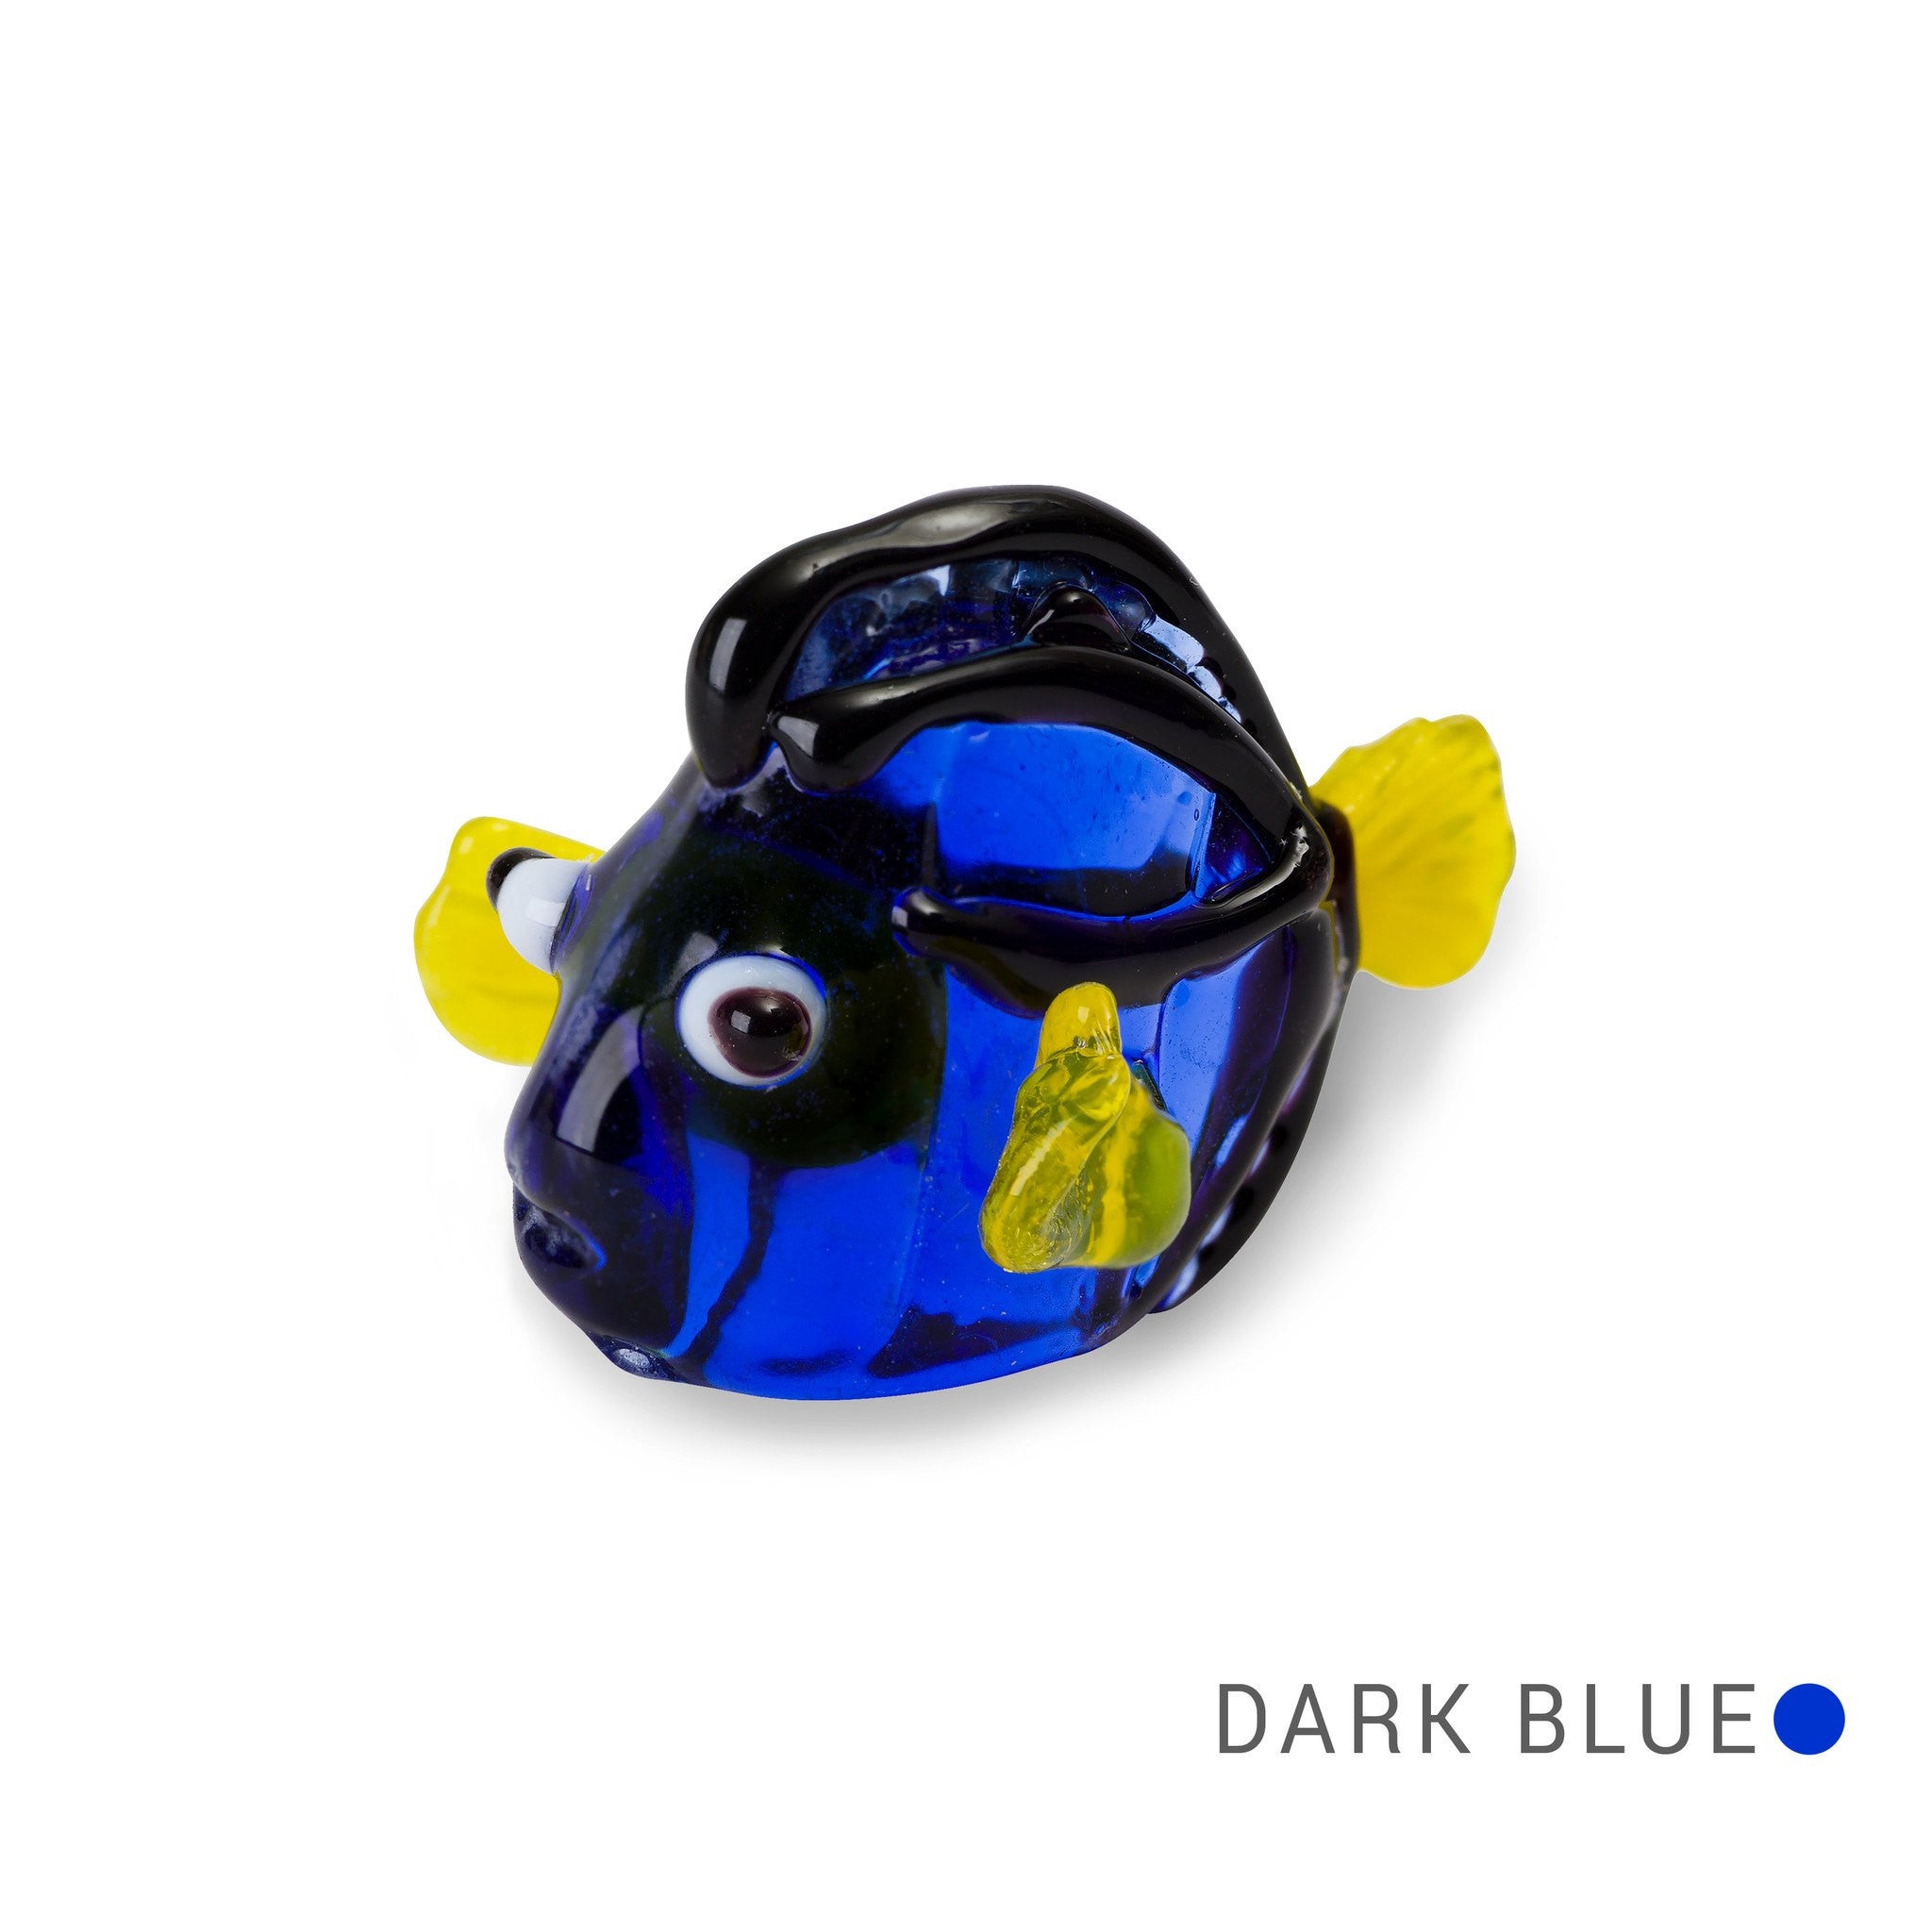 DORA the Blue Hippo Tang Fish (in Tynies Collector's Frame) Miniature glass figurines 